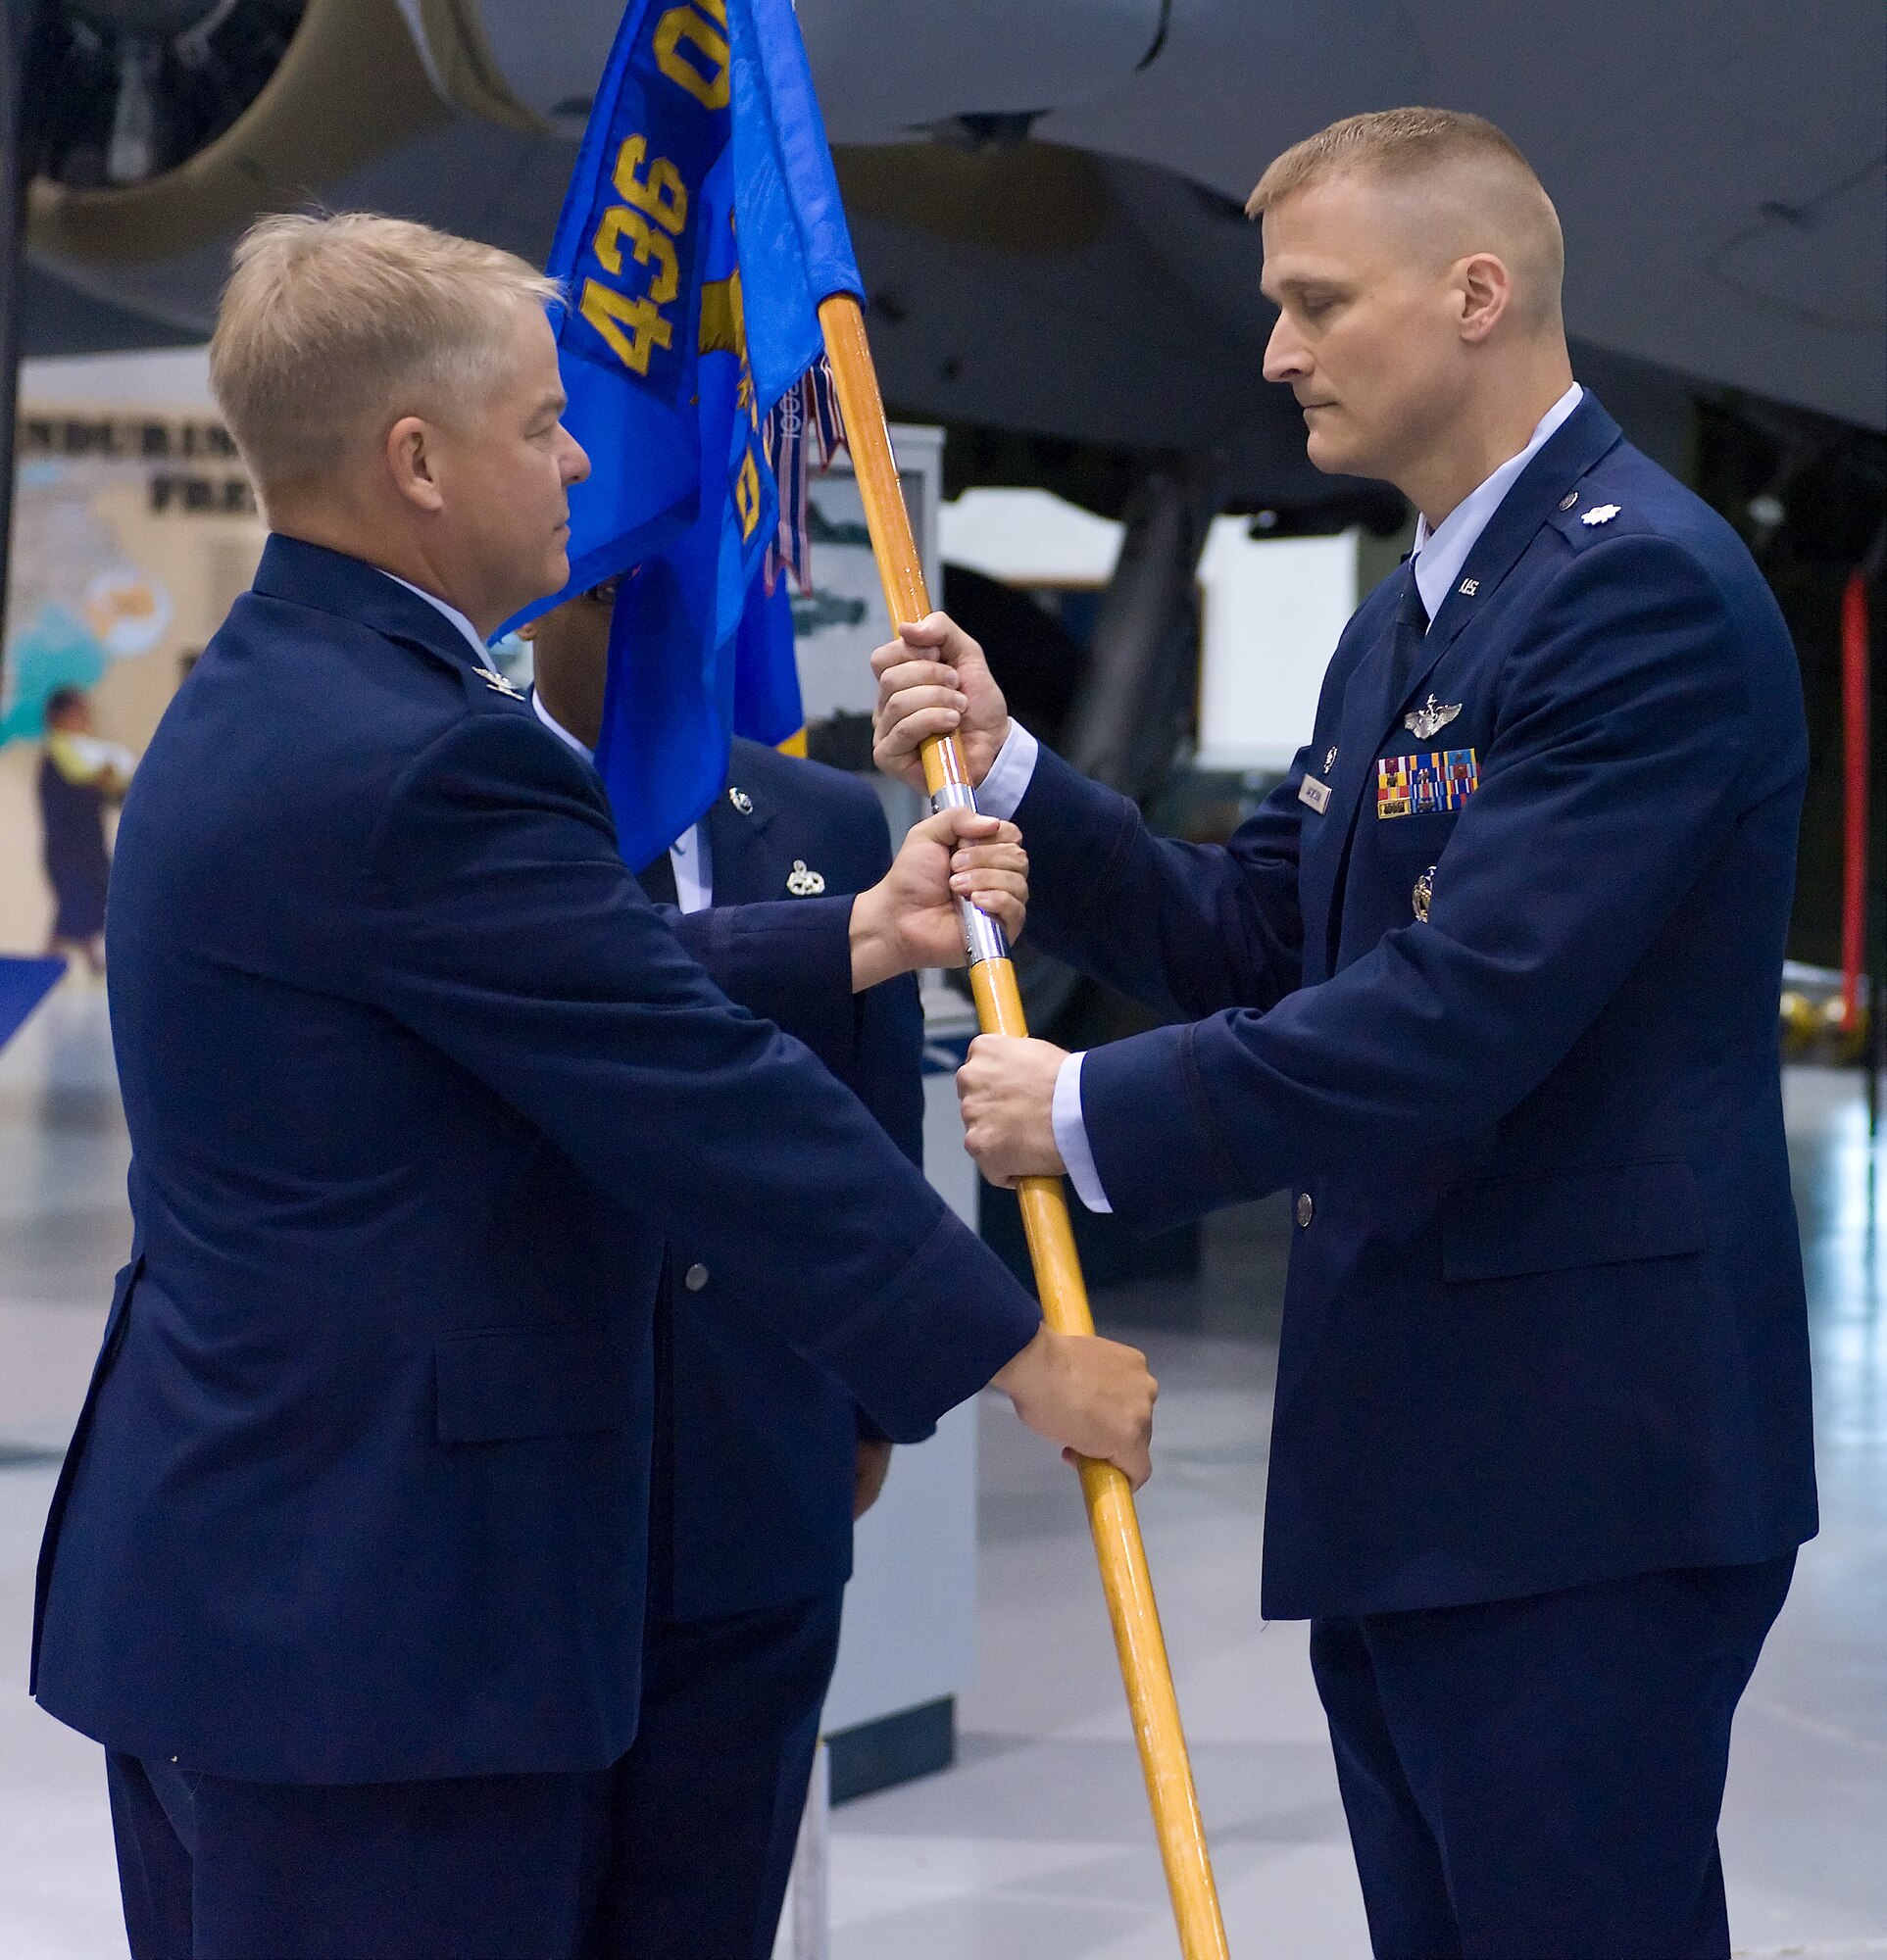 Col. David Hafer (left), 436th Operations Group commander, passes the guidon to Lt. Col. Douglas Jackson as he takes command of the 436th Operations Support Squadron July 11, 2011, at Dover Air Force Base, Del. (U.S. Air Force photo by Roland Balik)